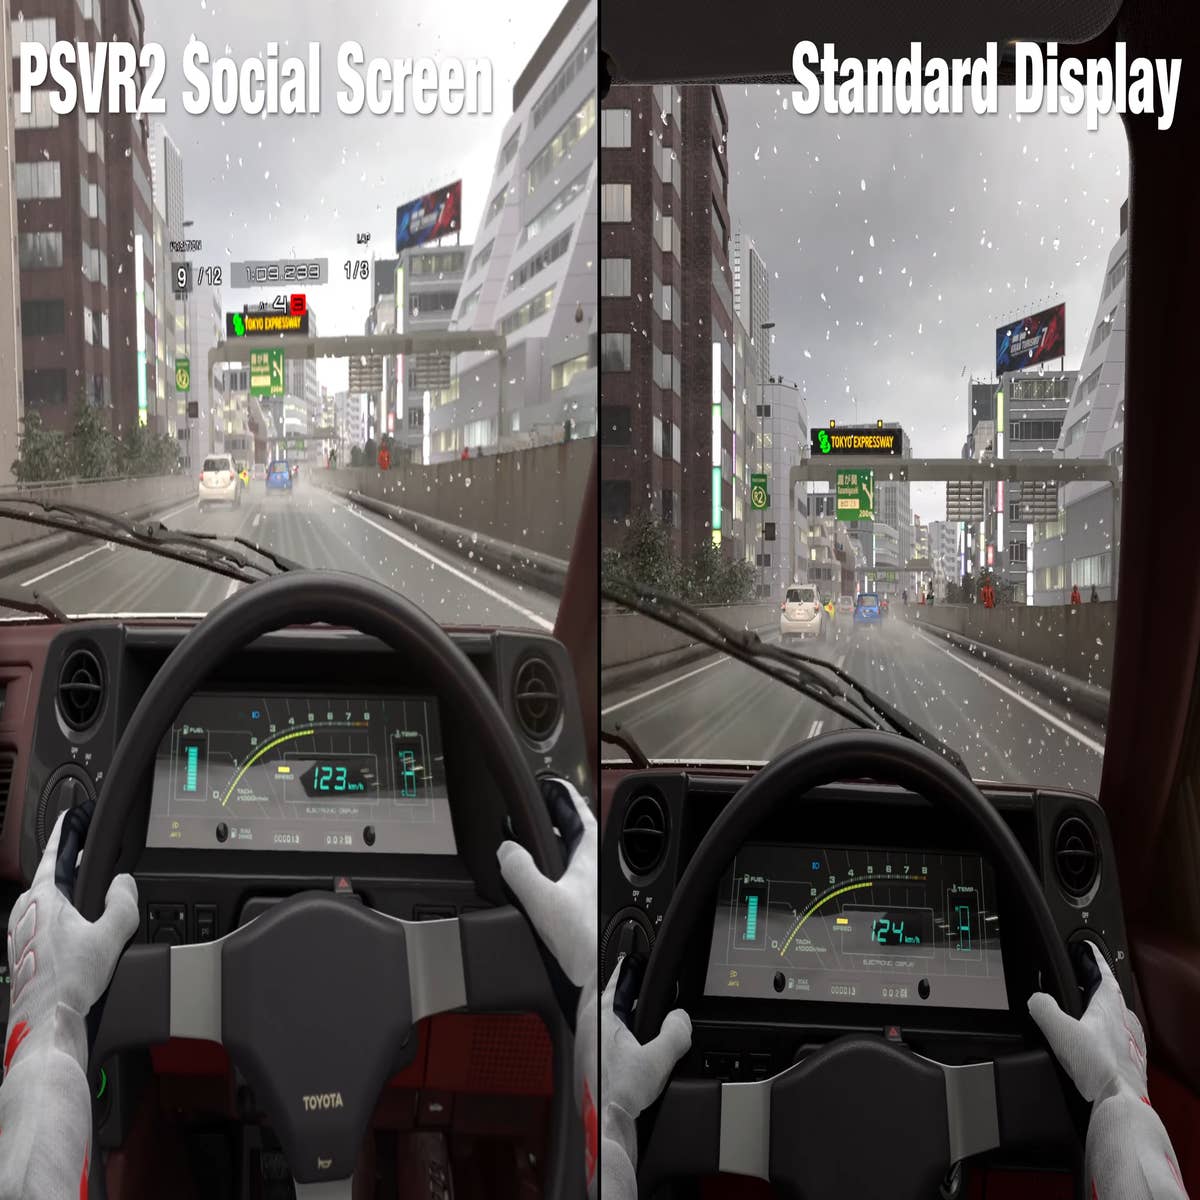 Watch: Gran Turismo 7 VR Gameplay, New Details Revealed